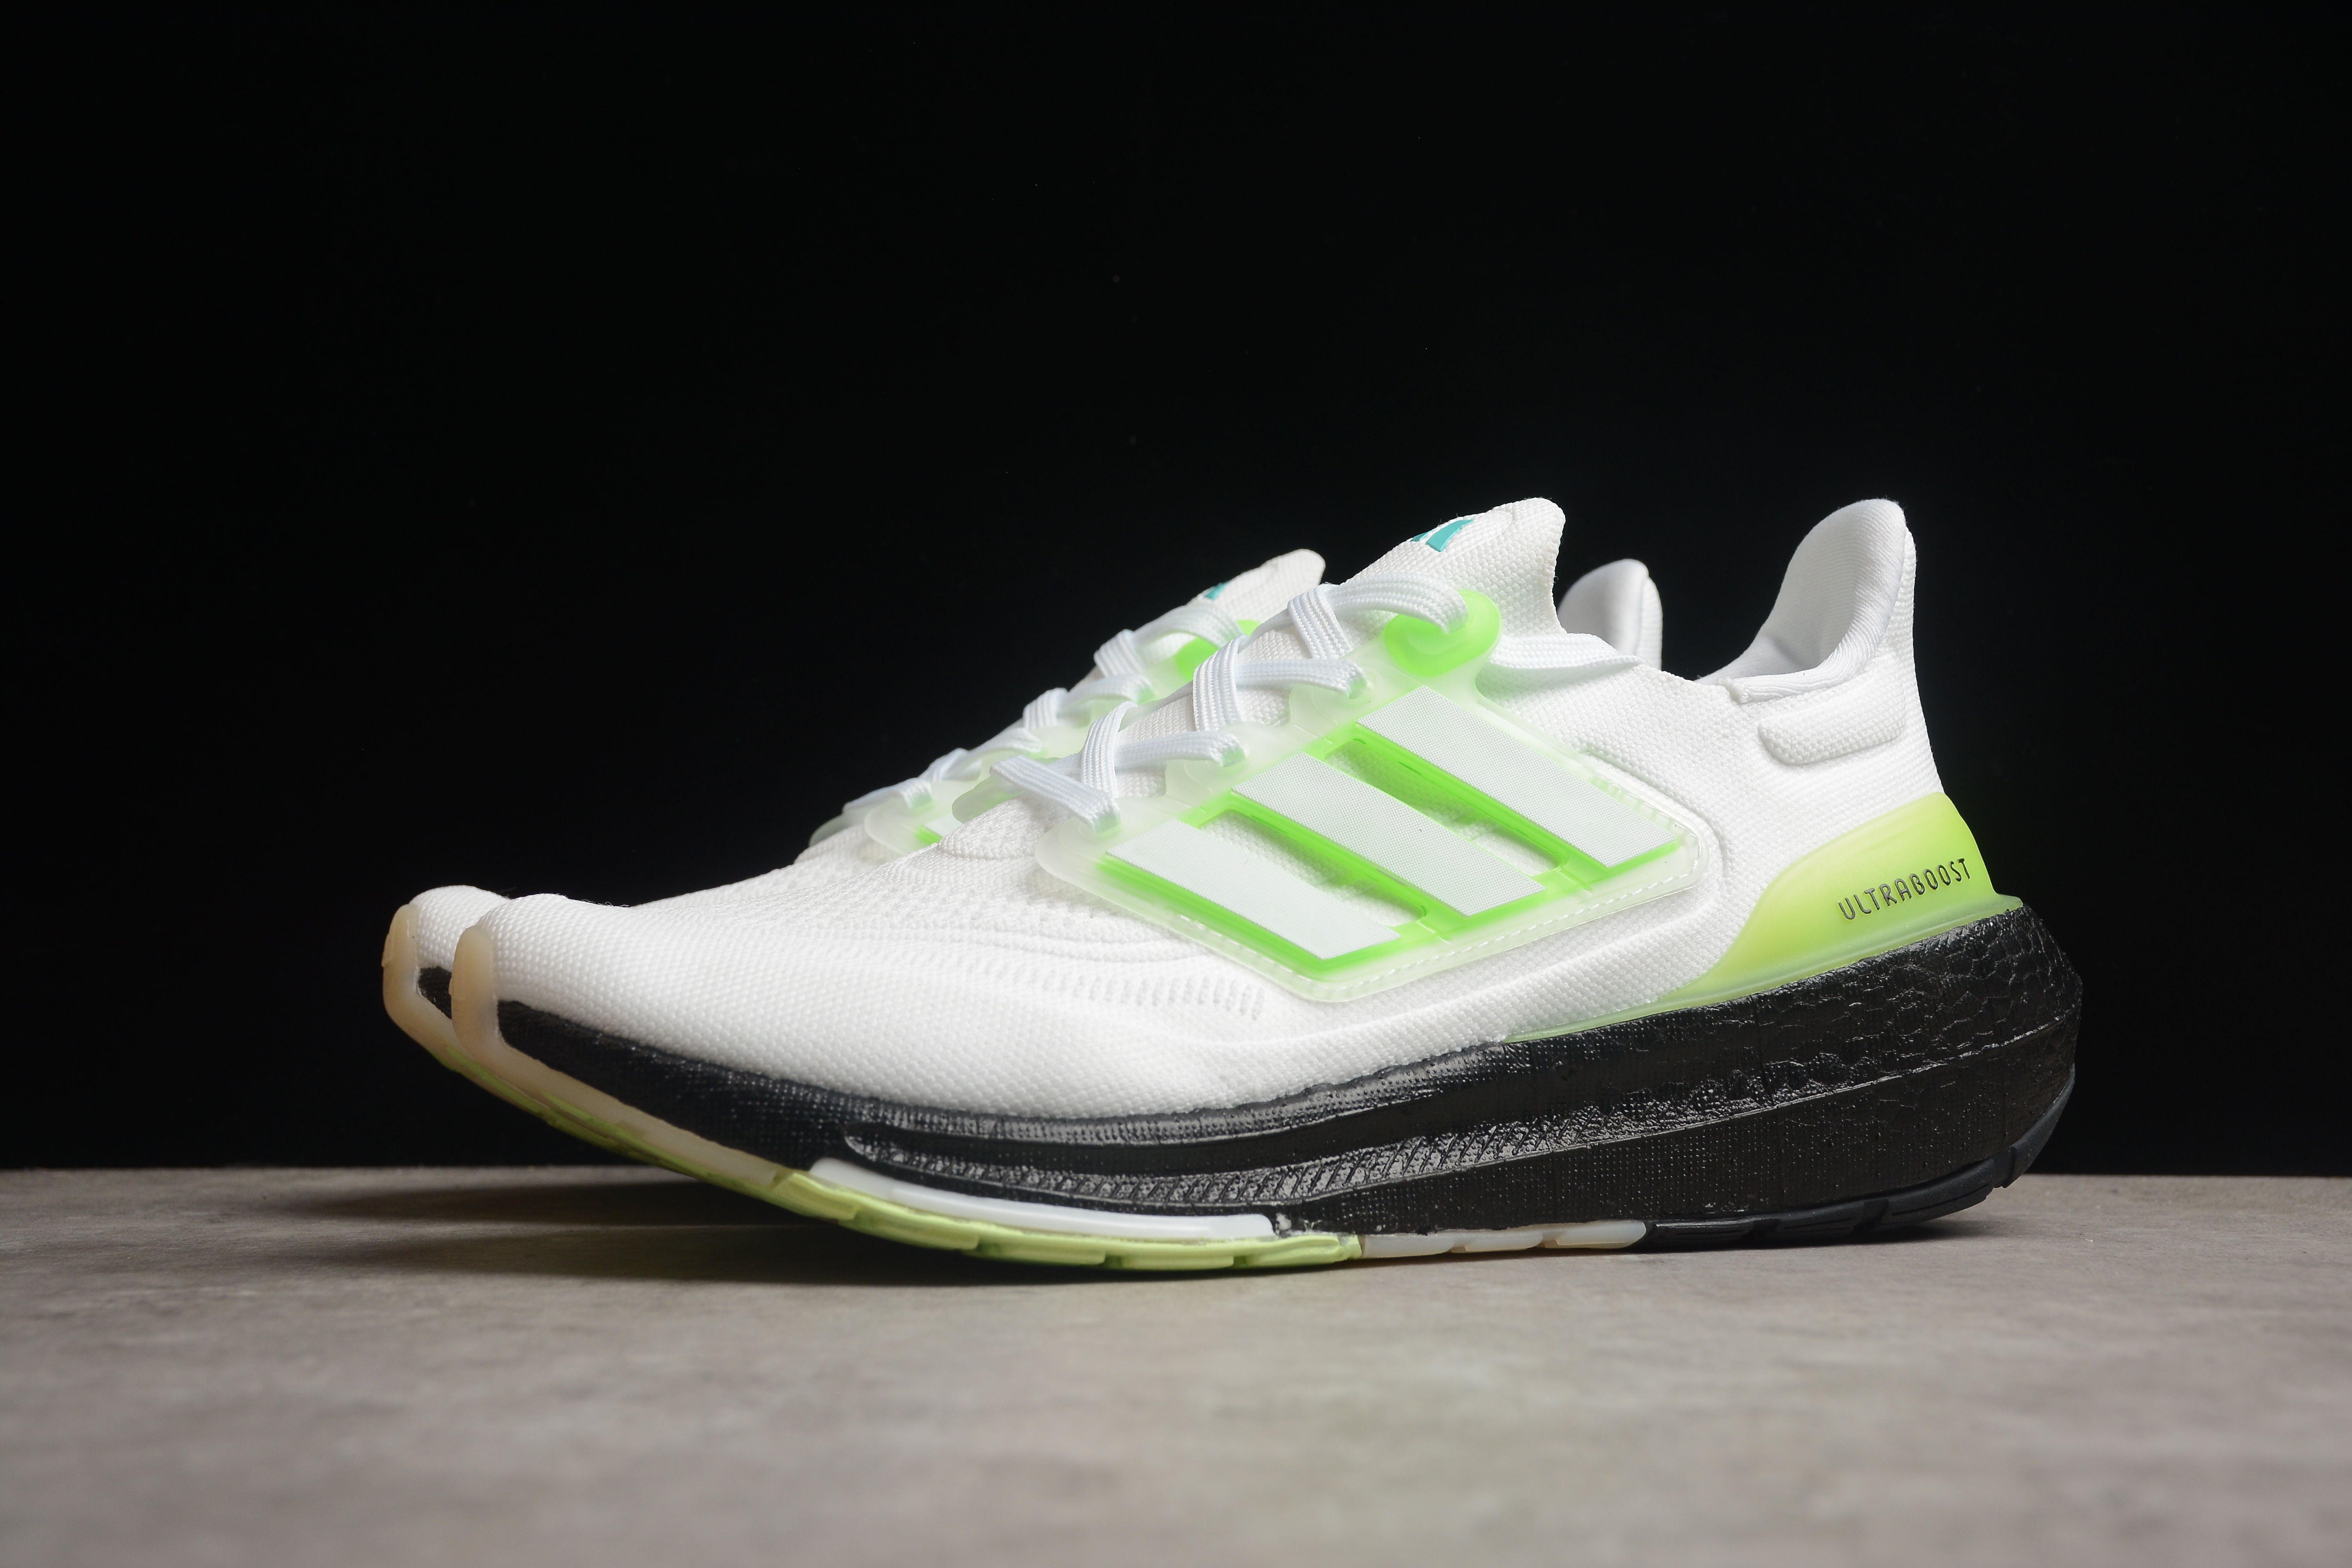 Adidas ultraboost white/black/green shoes